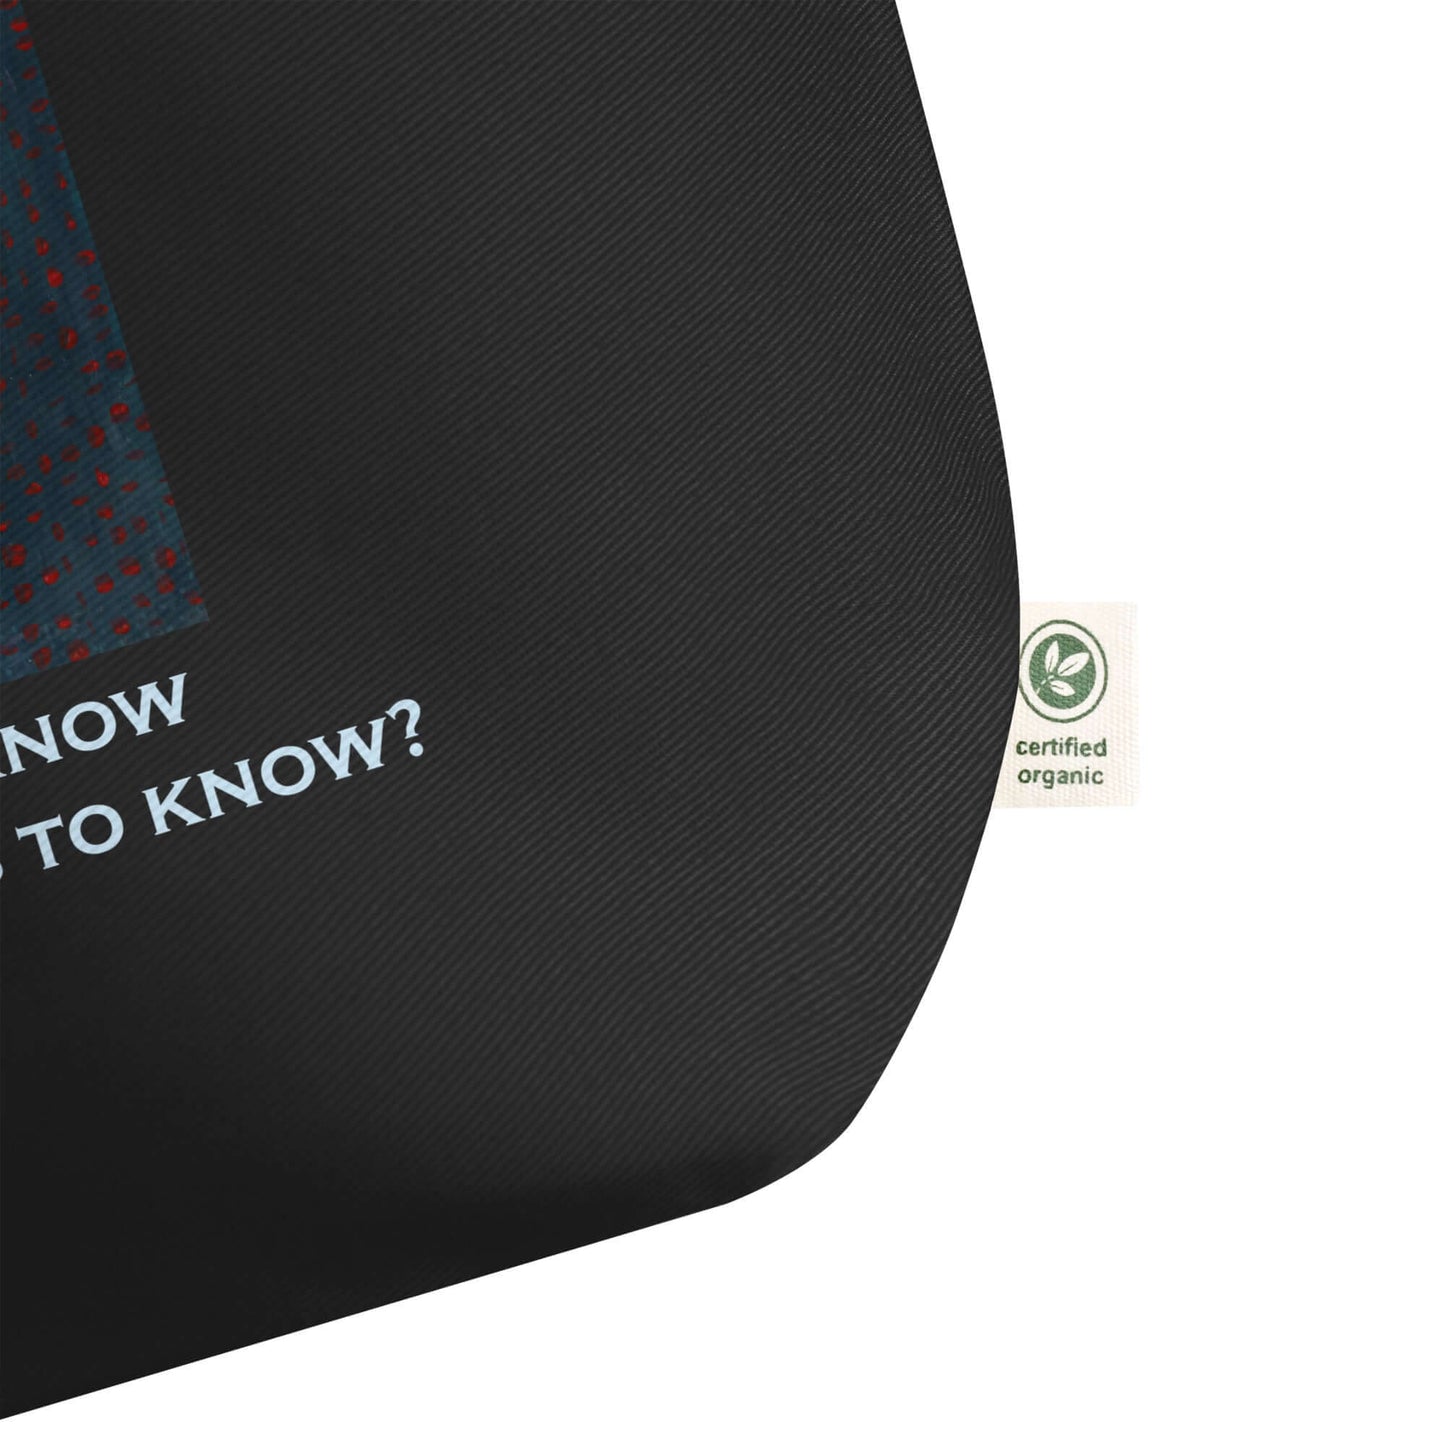 How it Feels to Know - Large organic tote bag